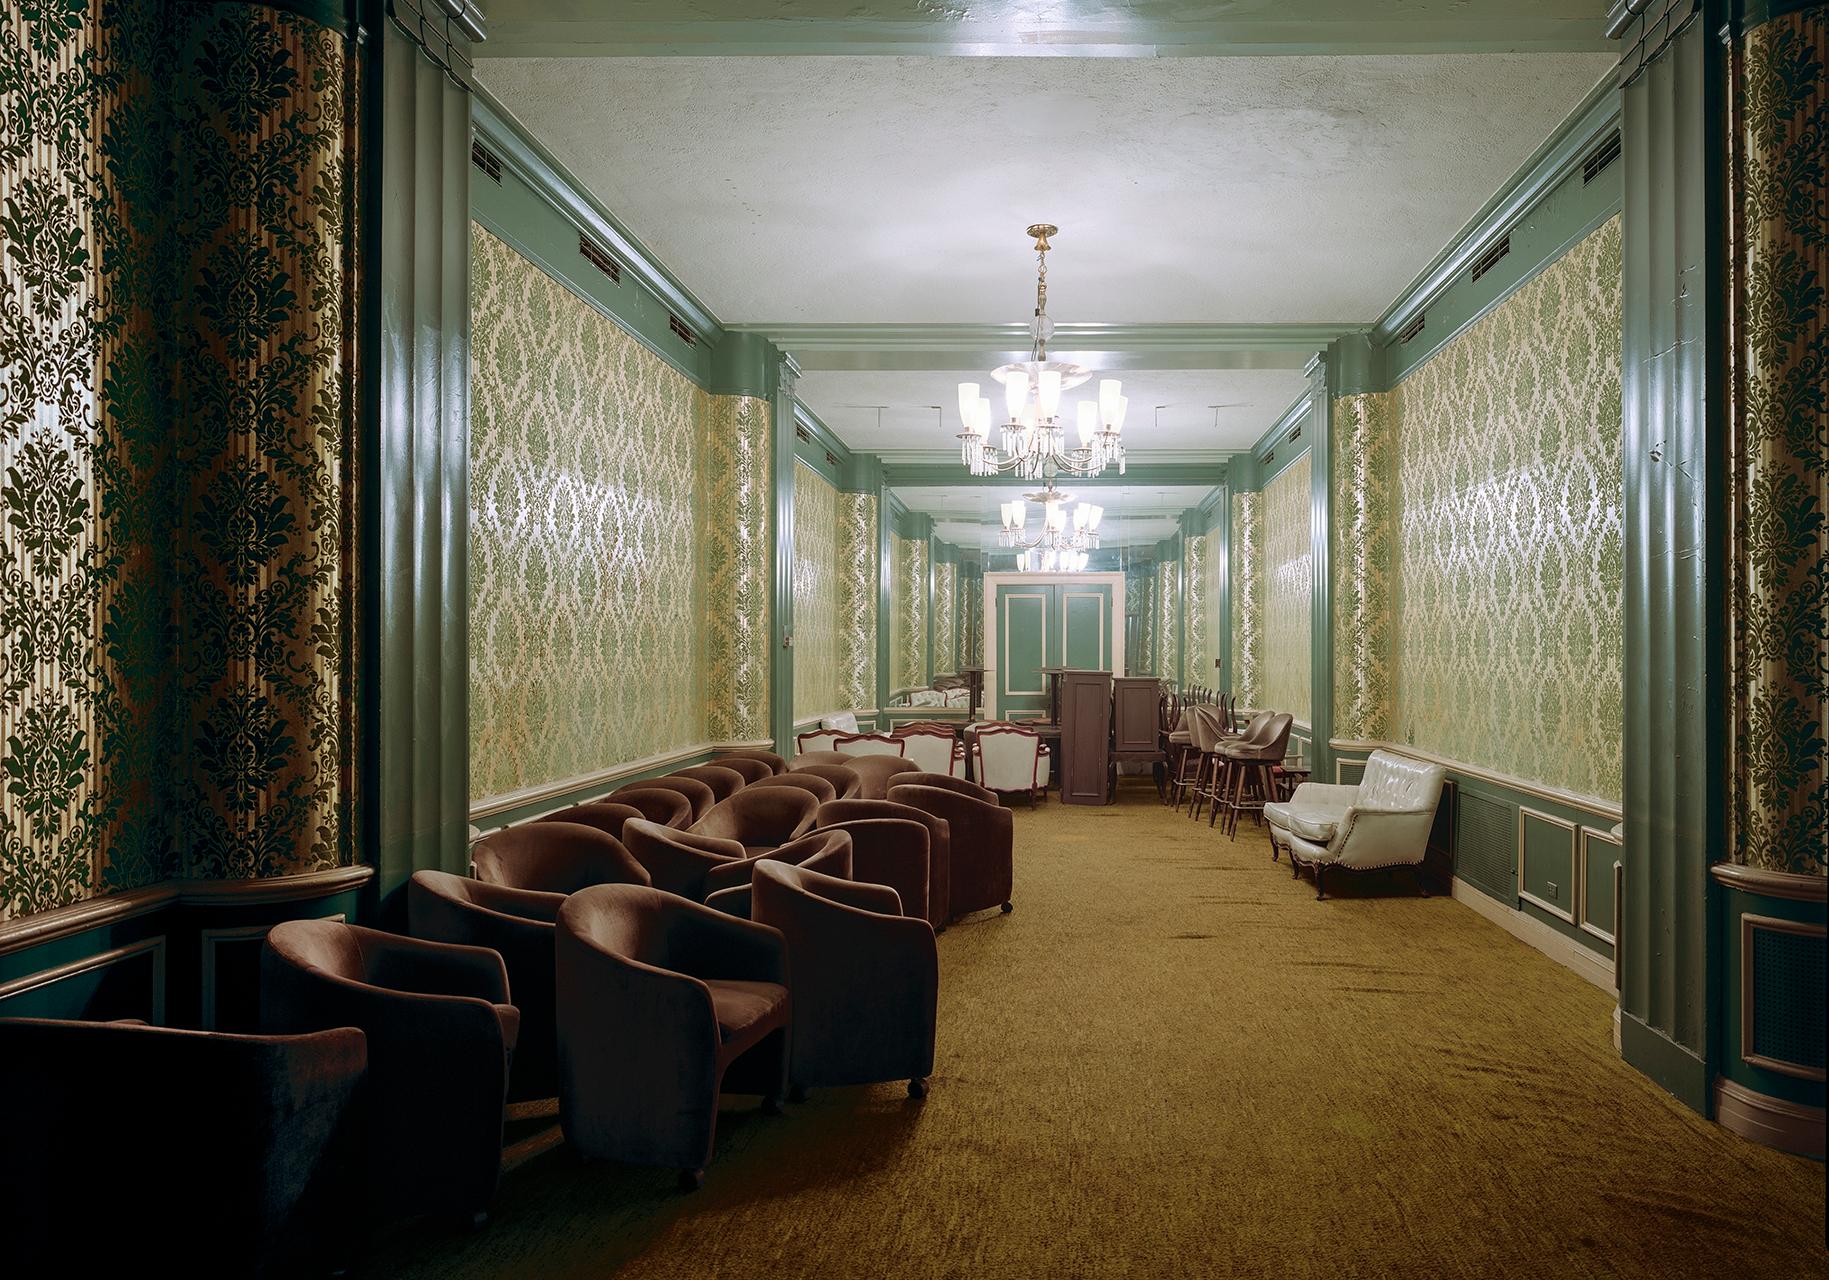 In 2005, mere weeks before the demolition of the Ambassador Hotel (and the Cocoanut Grove), Robert Polidori captured the faded grandeur of one of Los Angeles's most legendary establishments. Working closely with Polidori, The Lapis Press selected